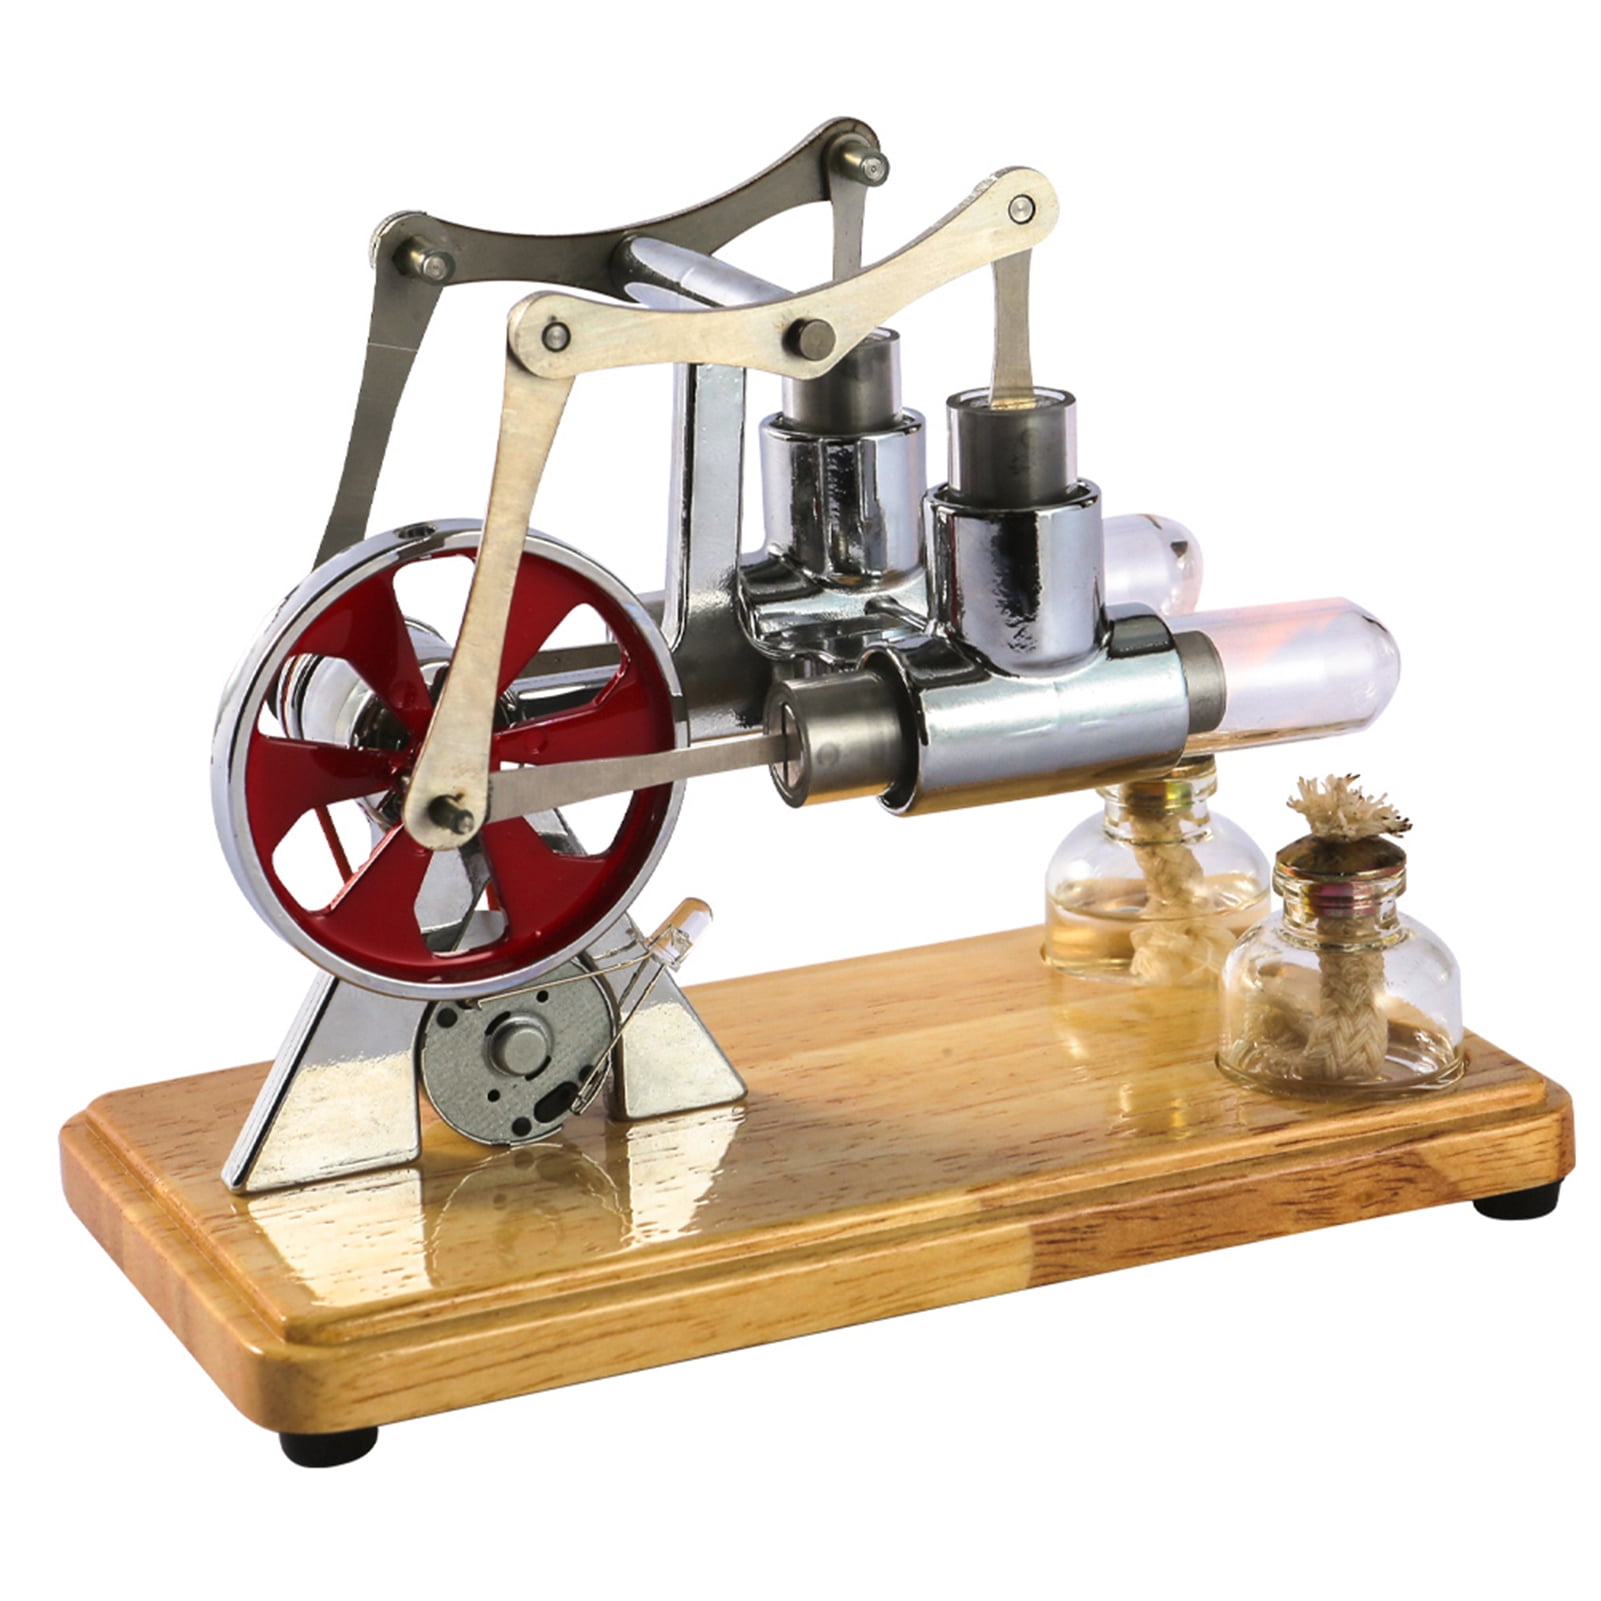 Hot Live Steam Engine Model Physical Generator School Science Project Kits 